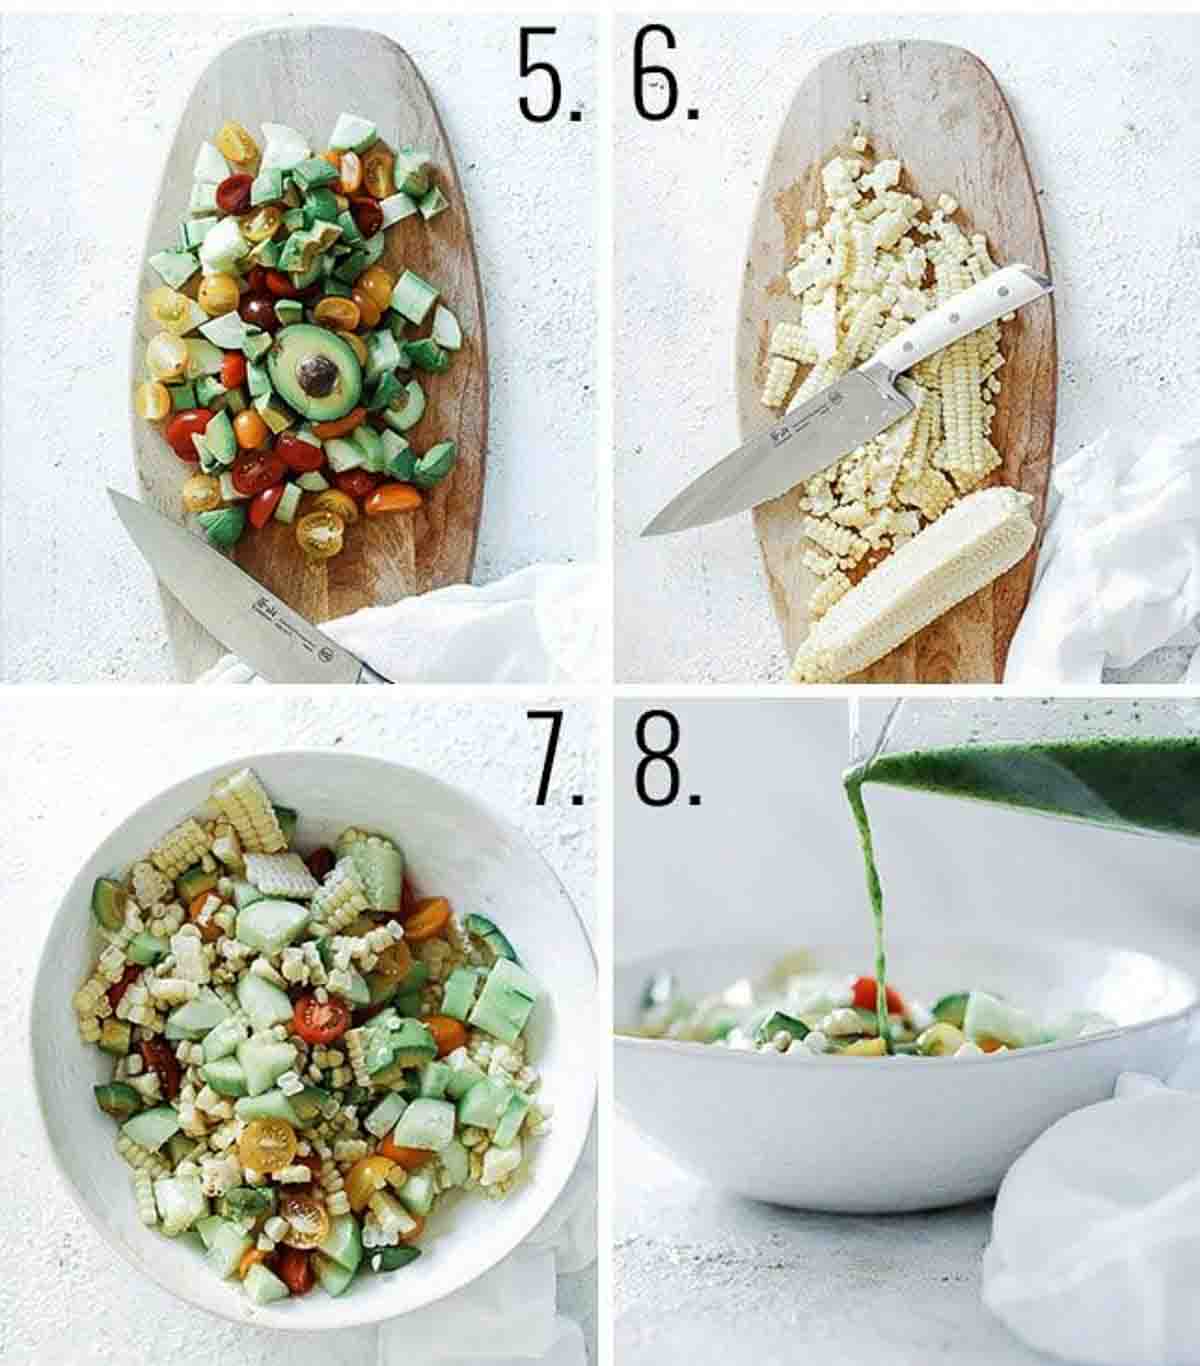 A collage showing the diced veggies, how to cut the corn and assemble the salad.